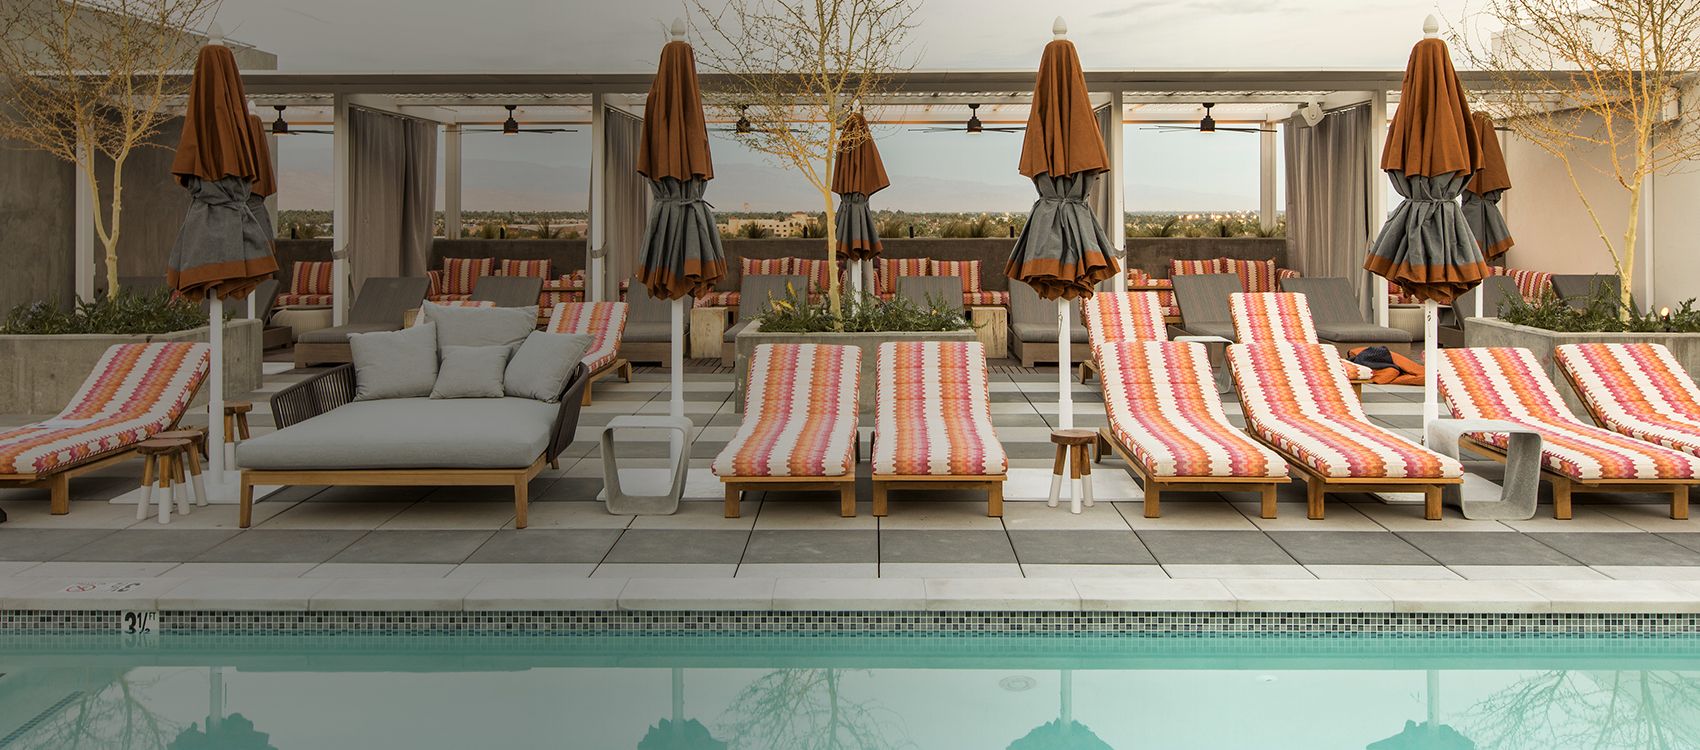 striped chaise lounges line a pool with views of desert mountains behind